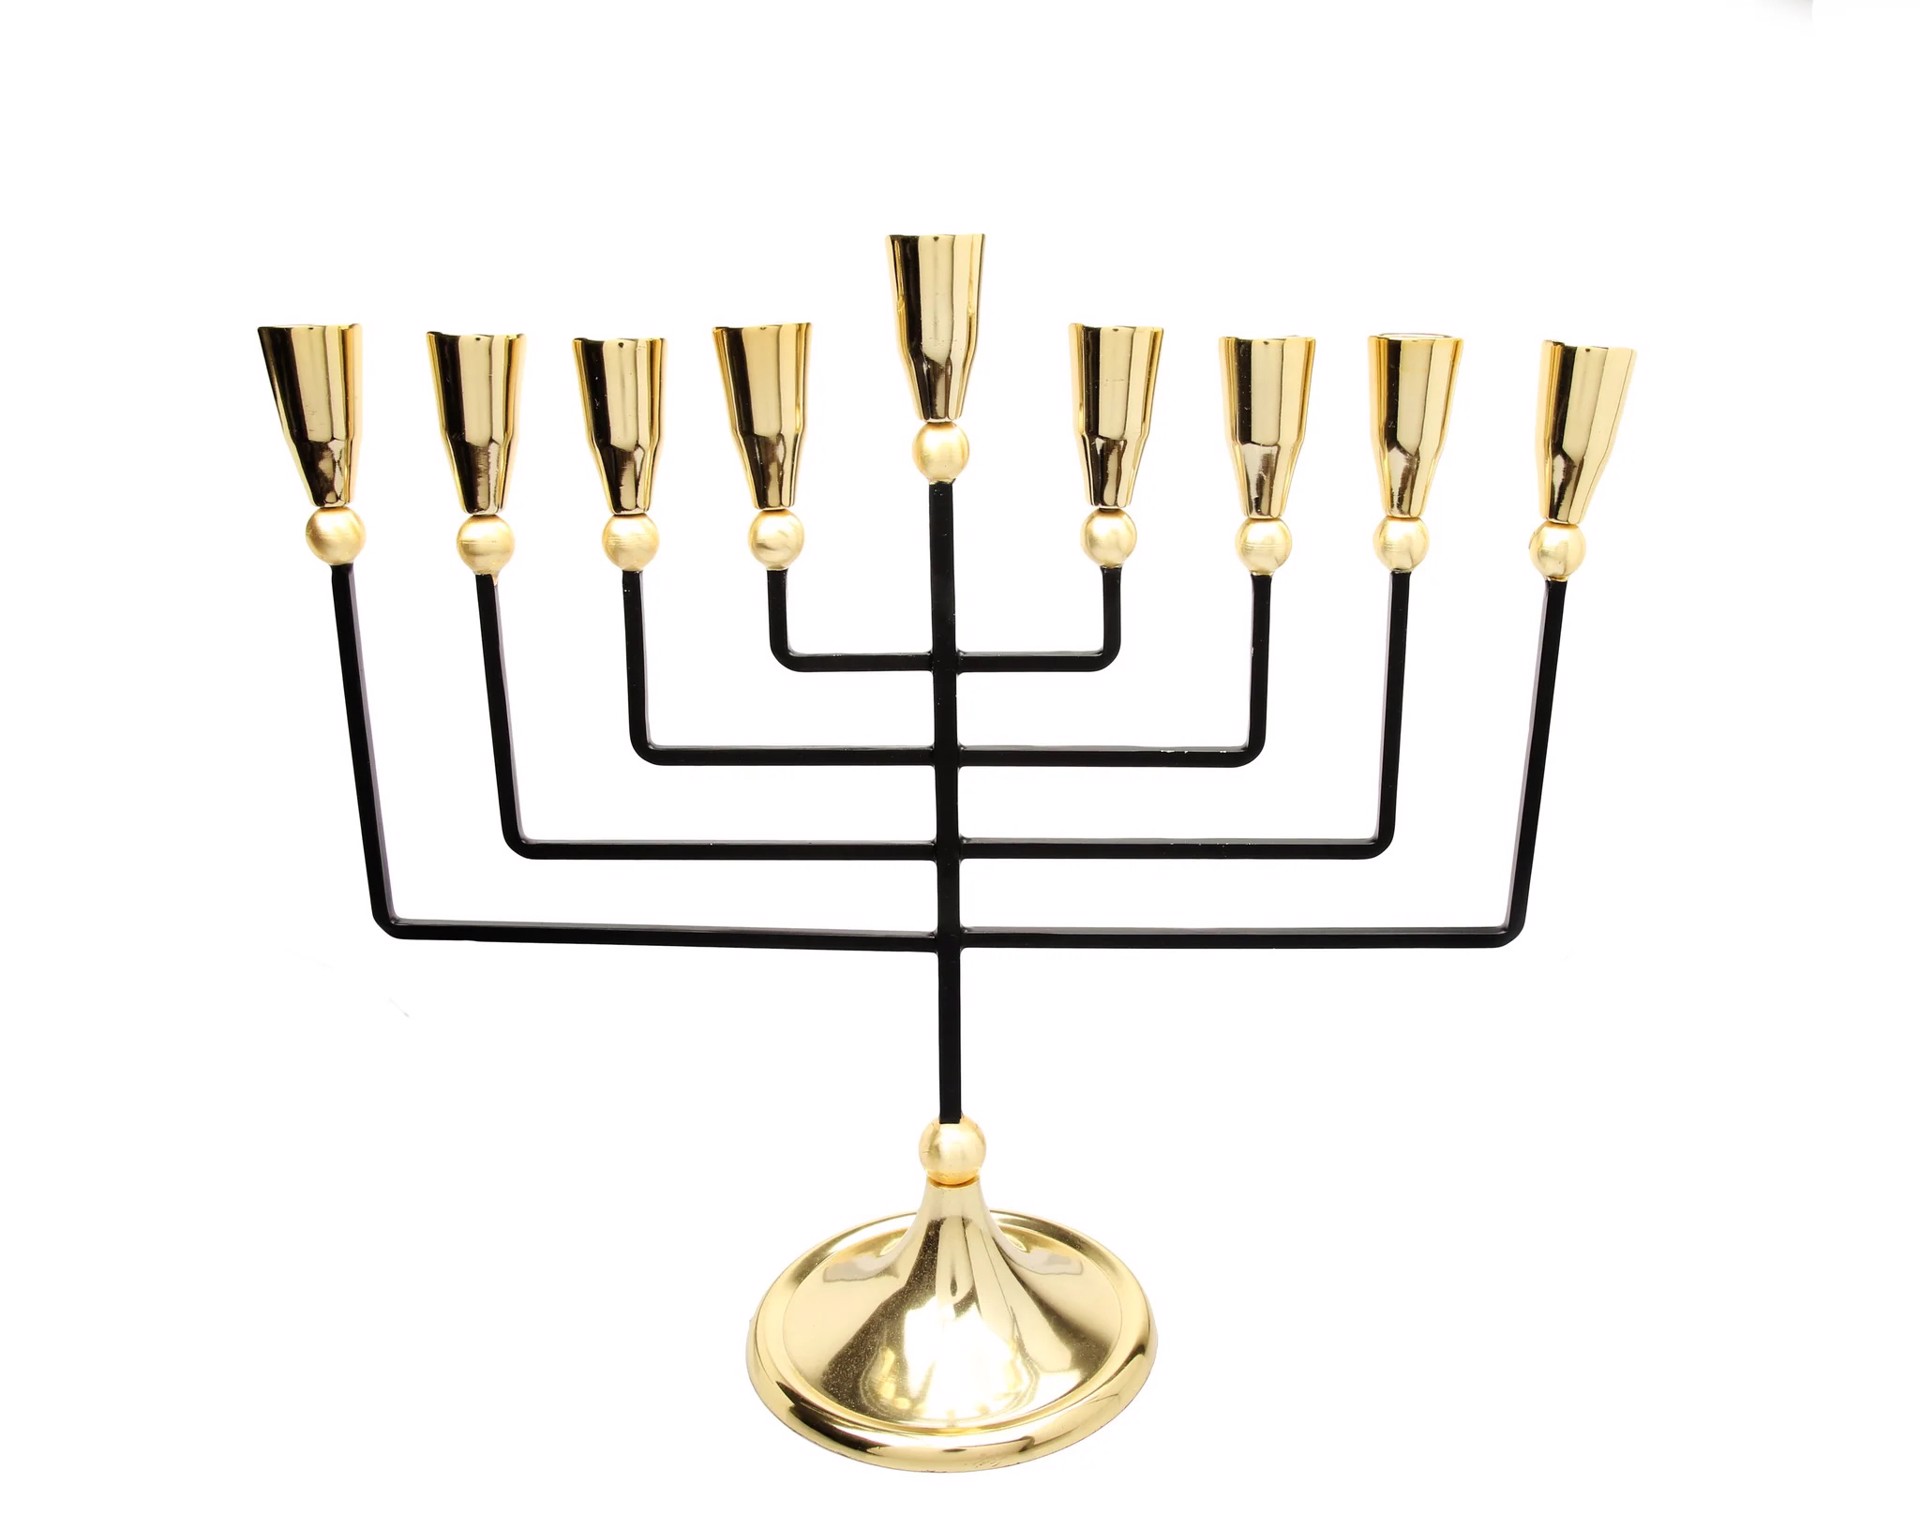 Black and Gold Straight Cut Menorah by Argent